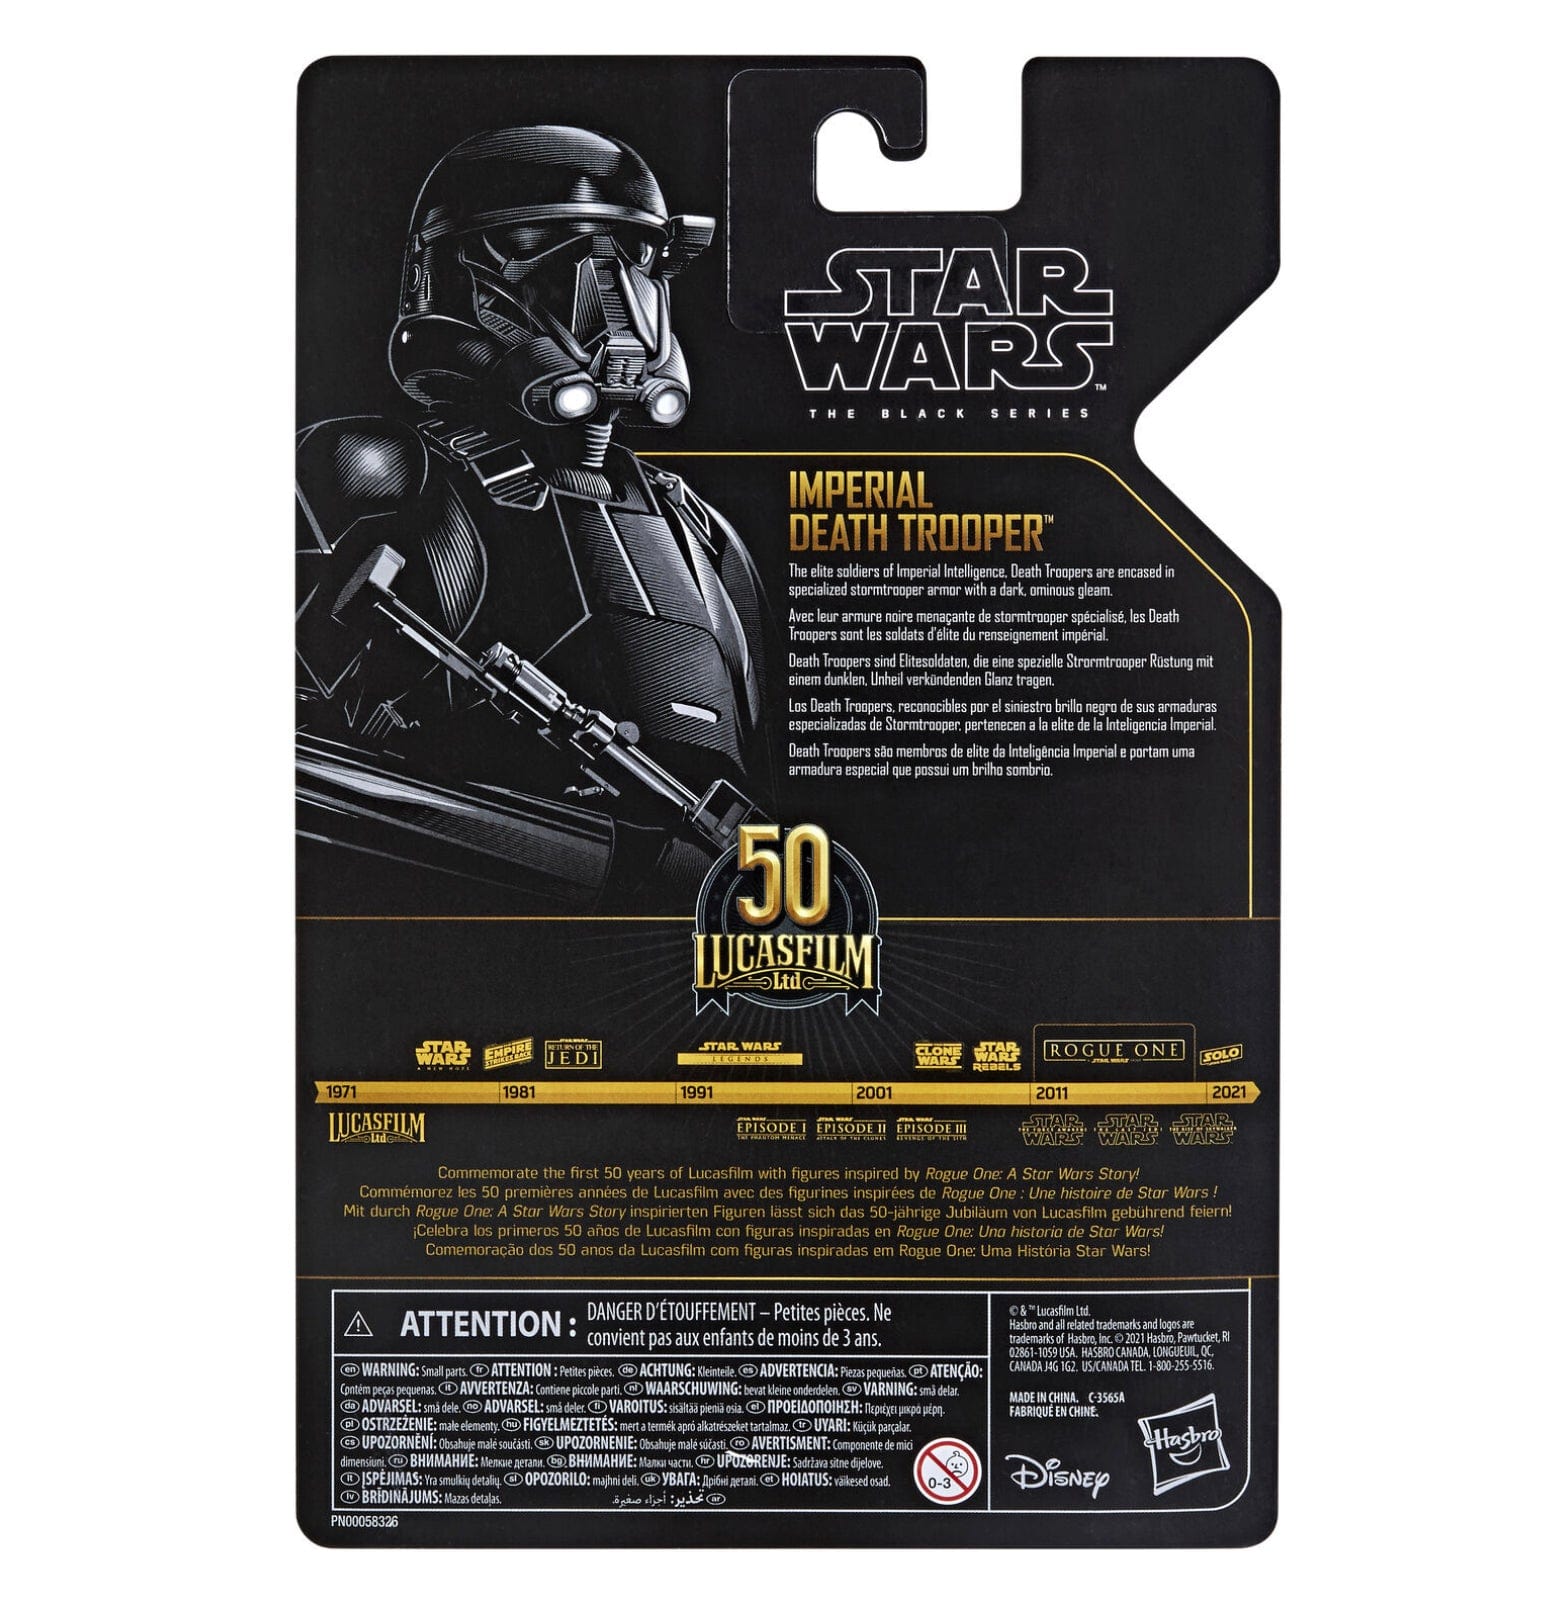 Star Wars The Black Series Archive Imperial Death Trooper 6in. 50th Anniversary